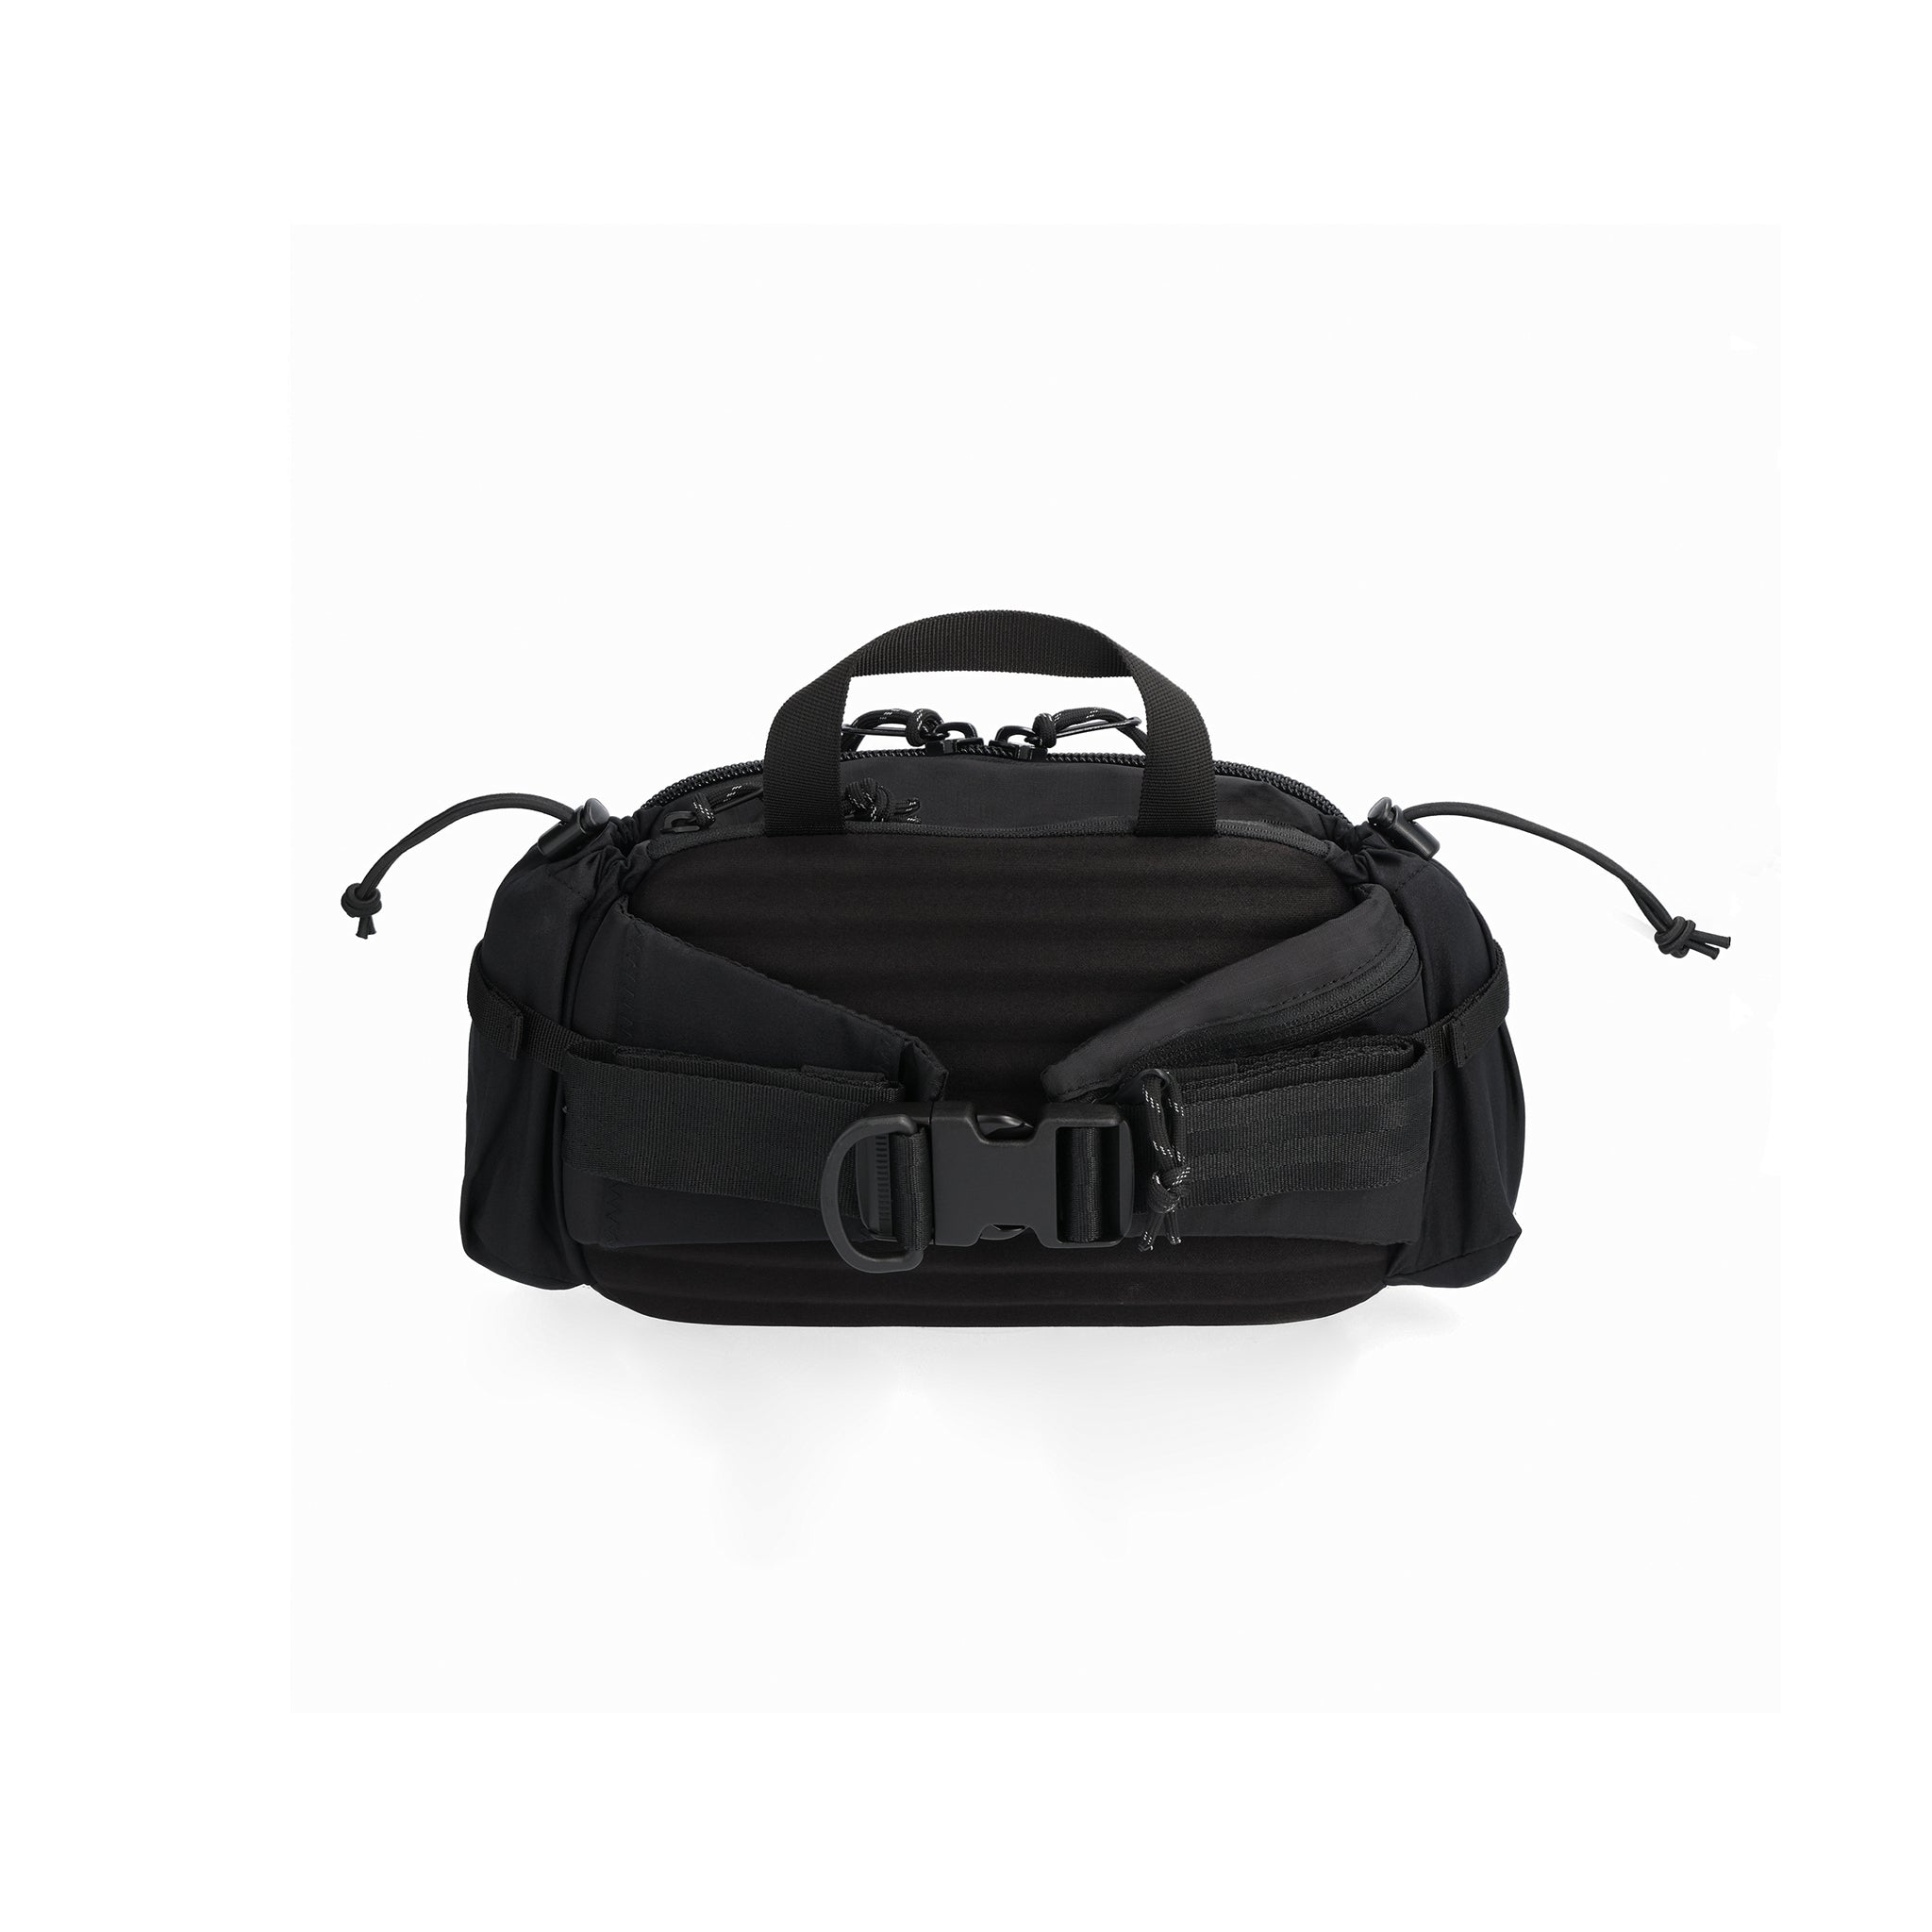 Back View of Topo Designs Mountain Hydro Hip Pack in "Black"